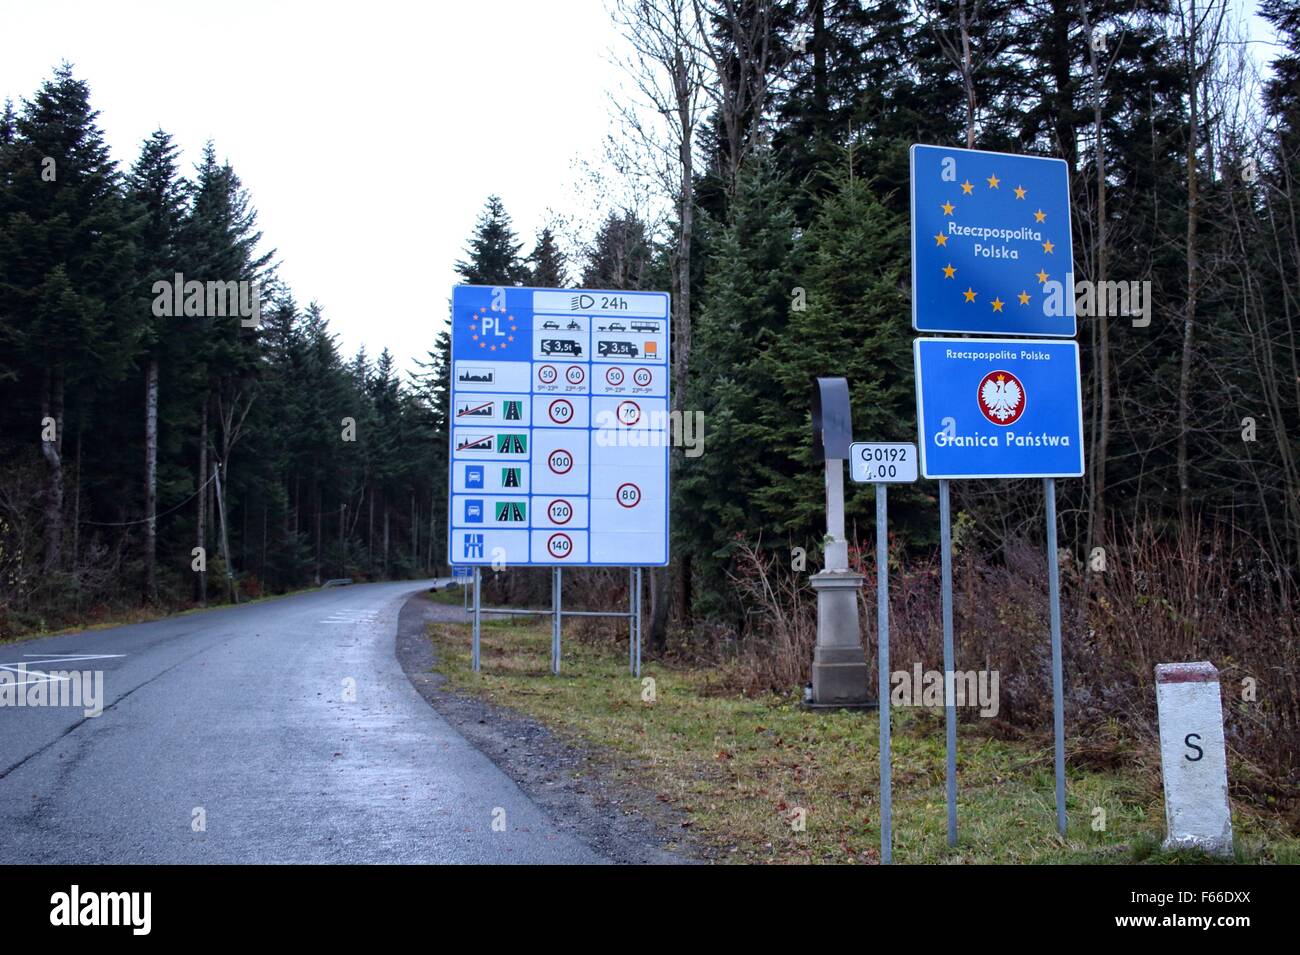 Poland Slovakia Muszynka 11th Nov 2015 Border Between Poland And Slovakia Near Polish Village Of Muszynka Road Signs Display Speed Limits In Both Countries And Show The Place Where Ends One And Begins